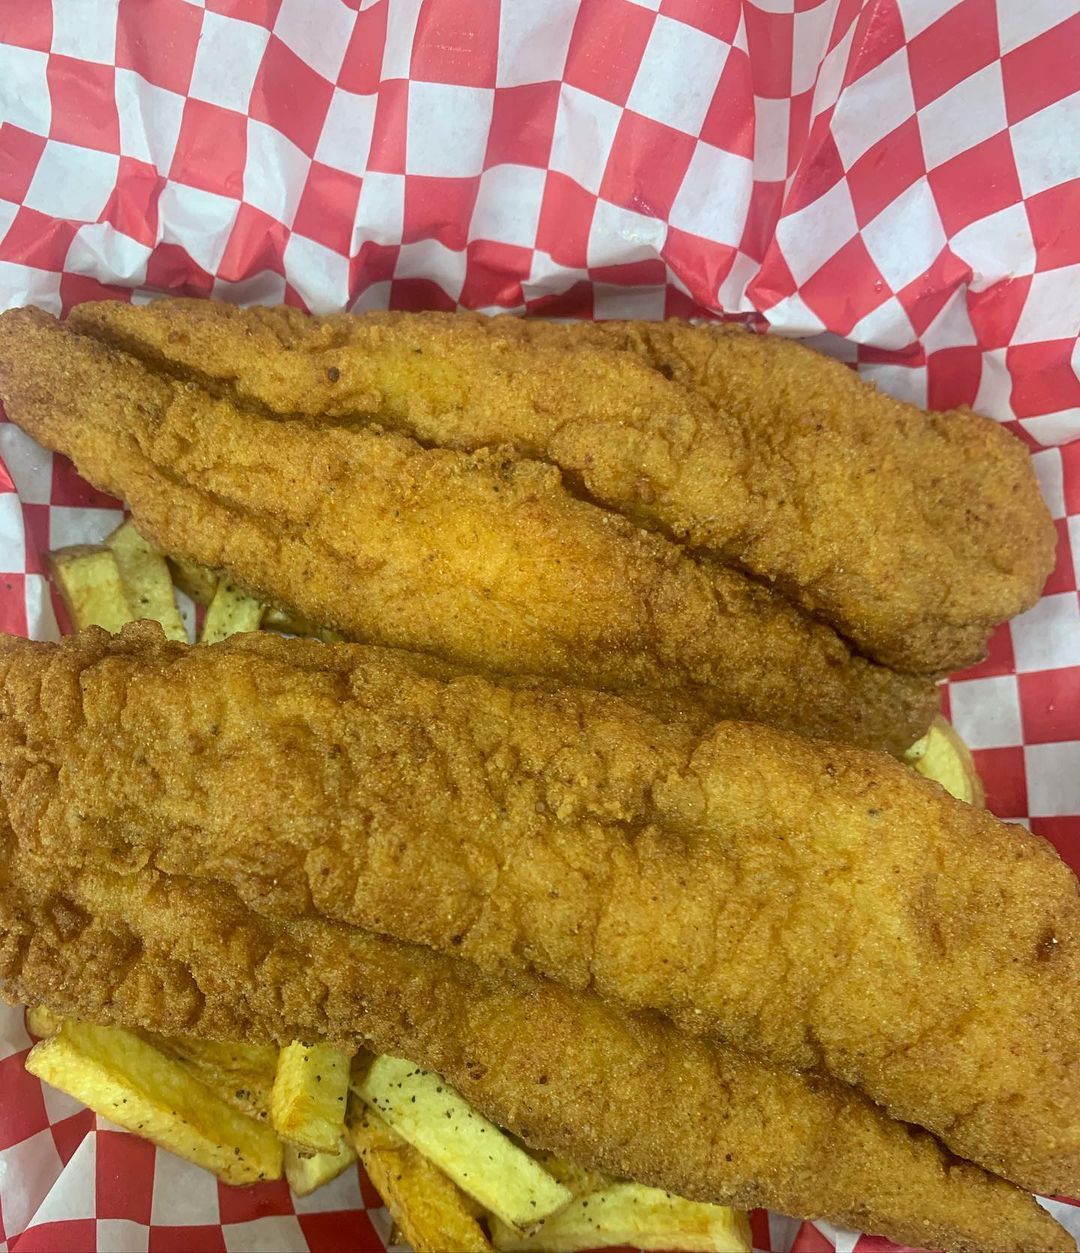 Fried Catfish GG's Fish & Chips Food Truck